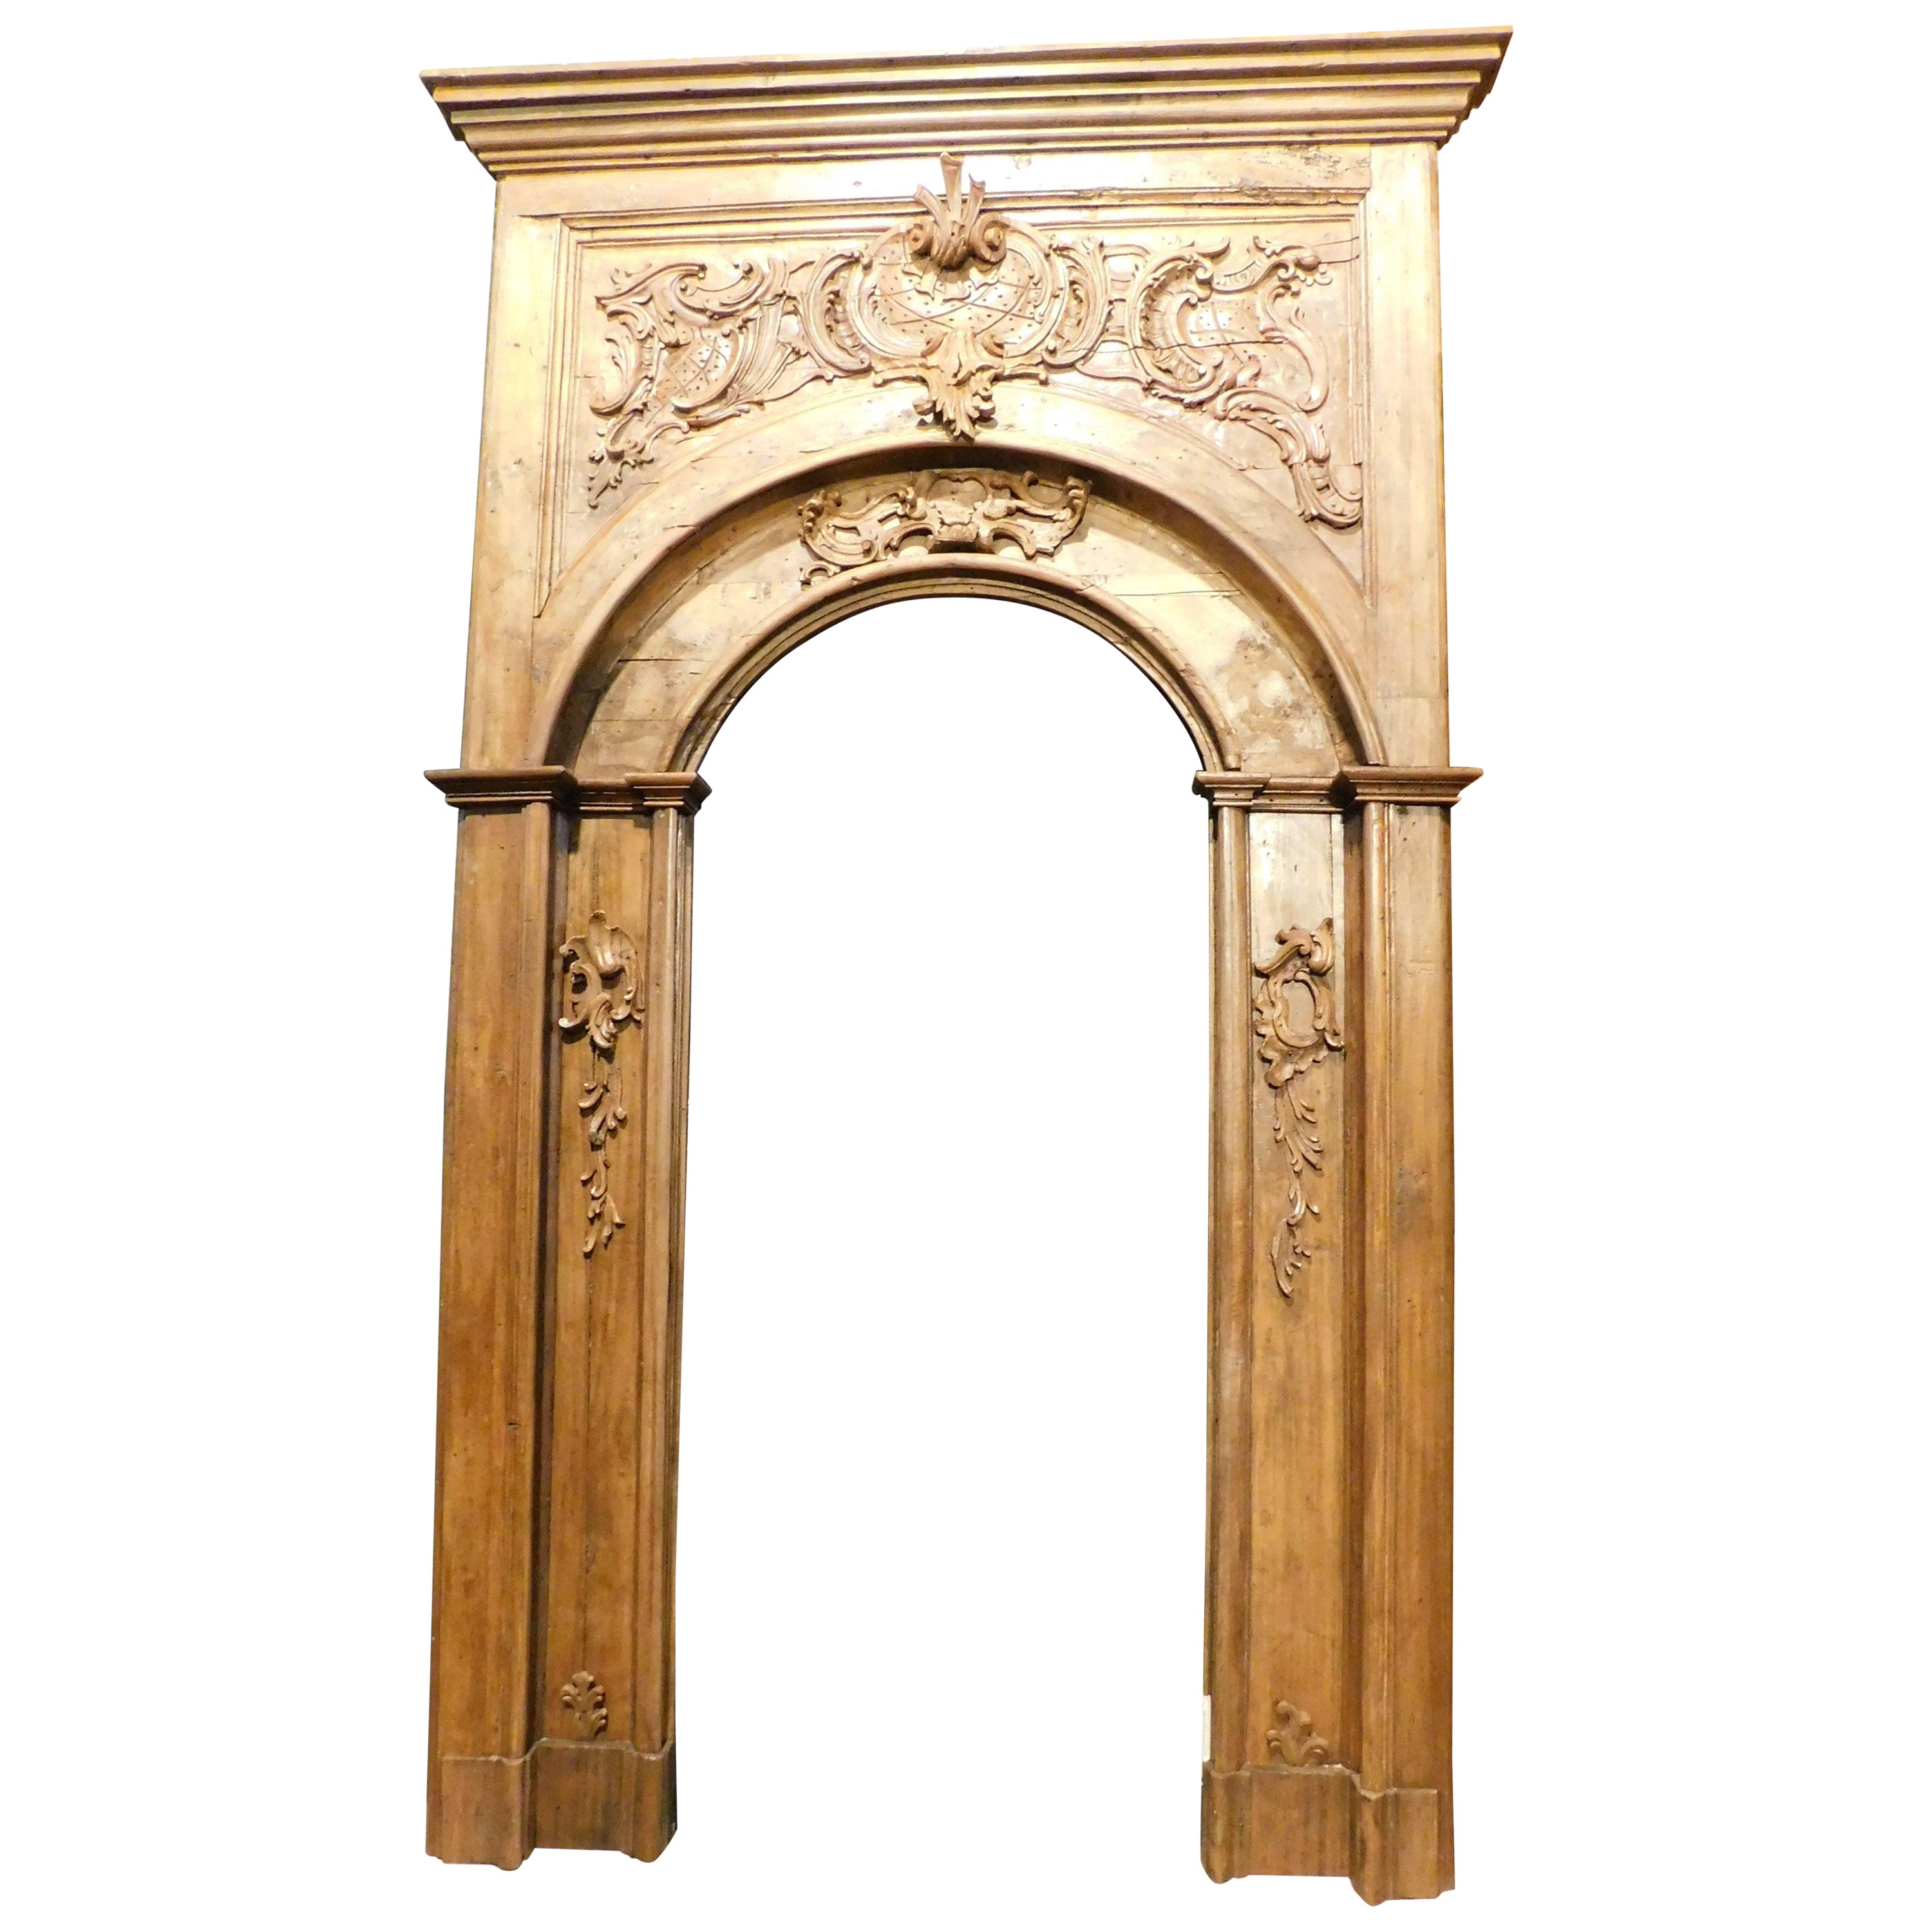 Huge amazing richly carved wooden portal frame, Italy